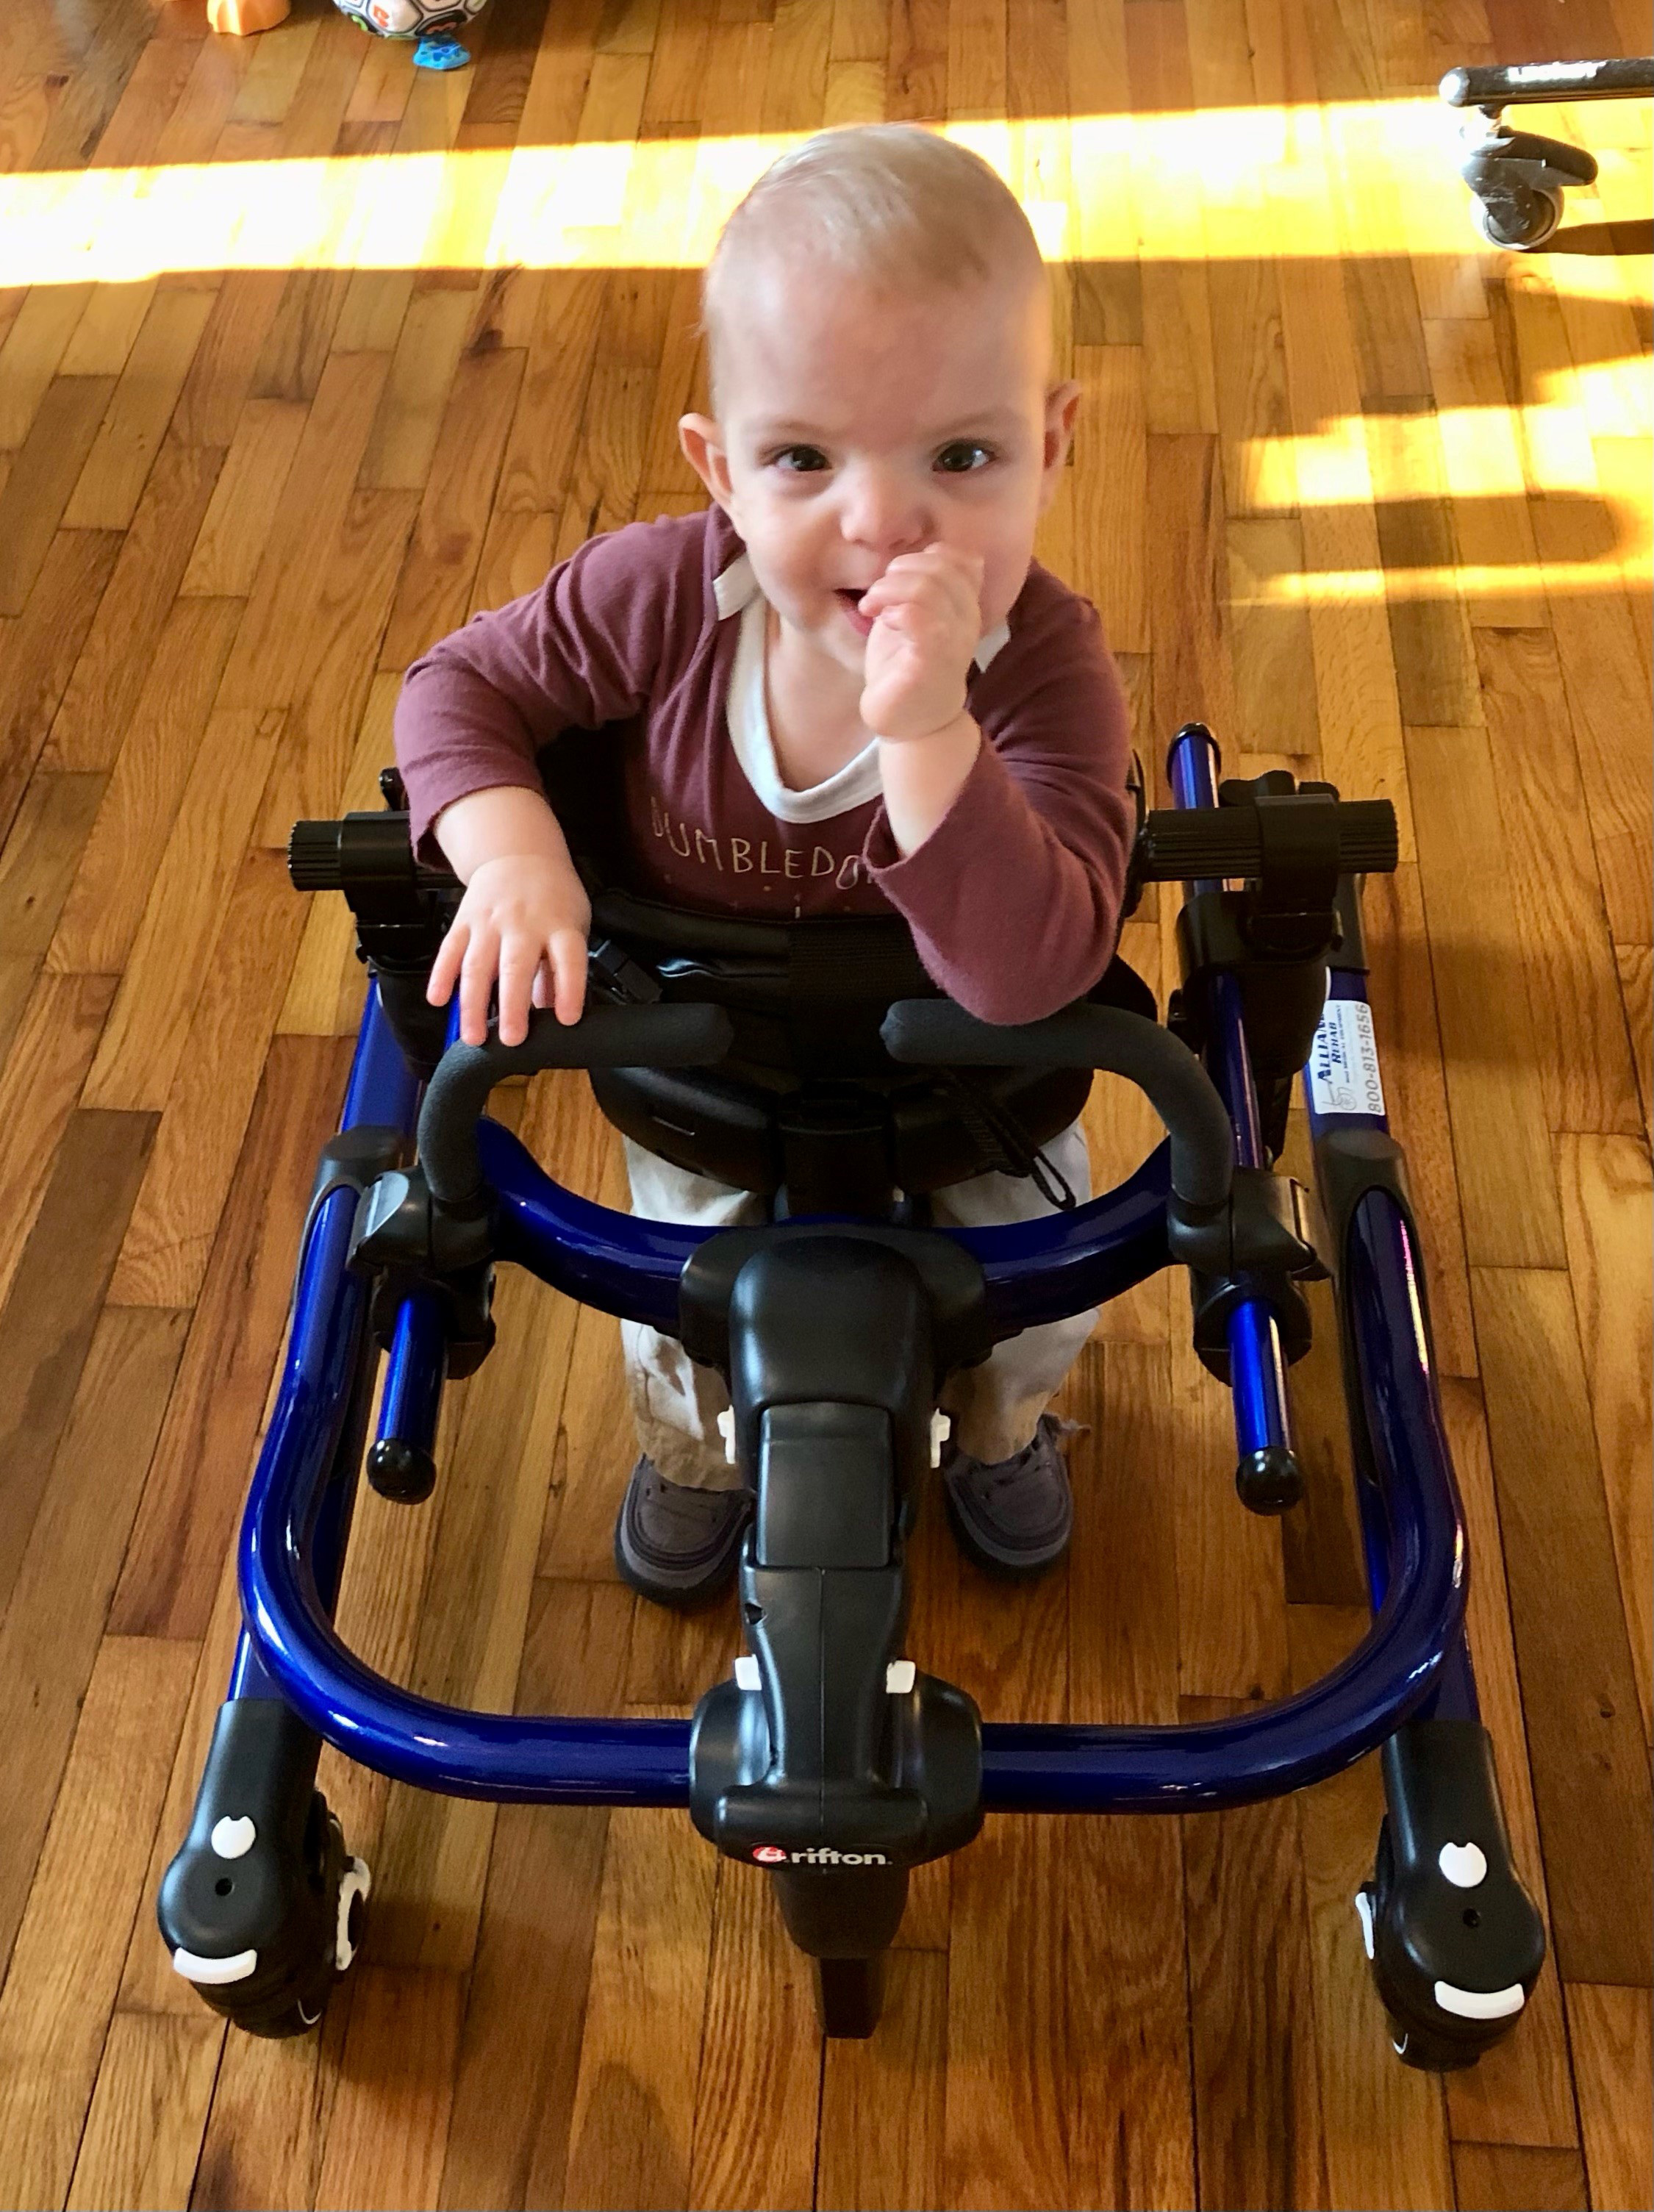 A photo of a two-year-old boy with spina bifida in a walker.